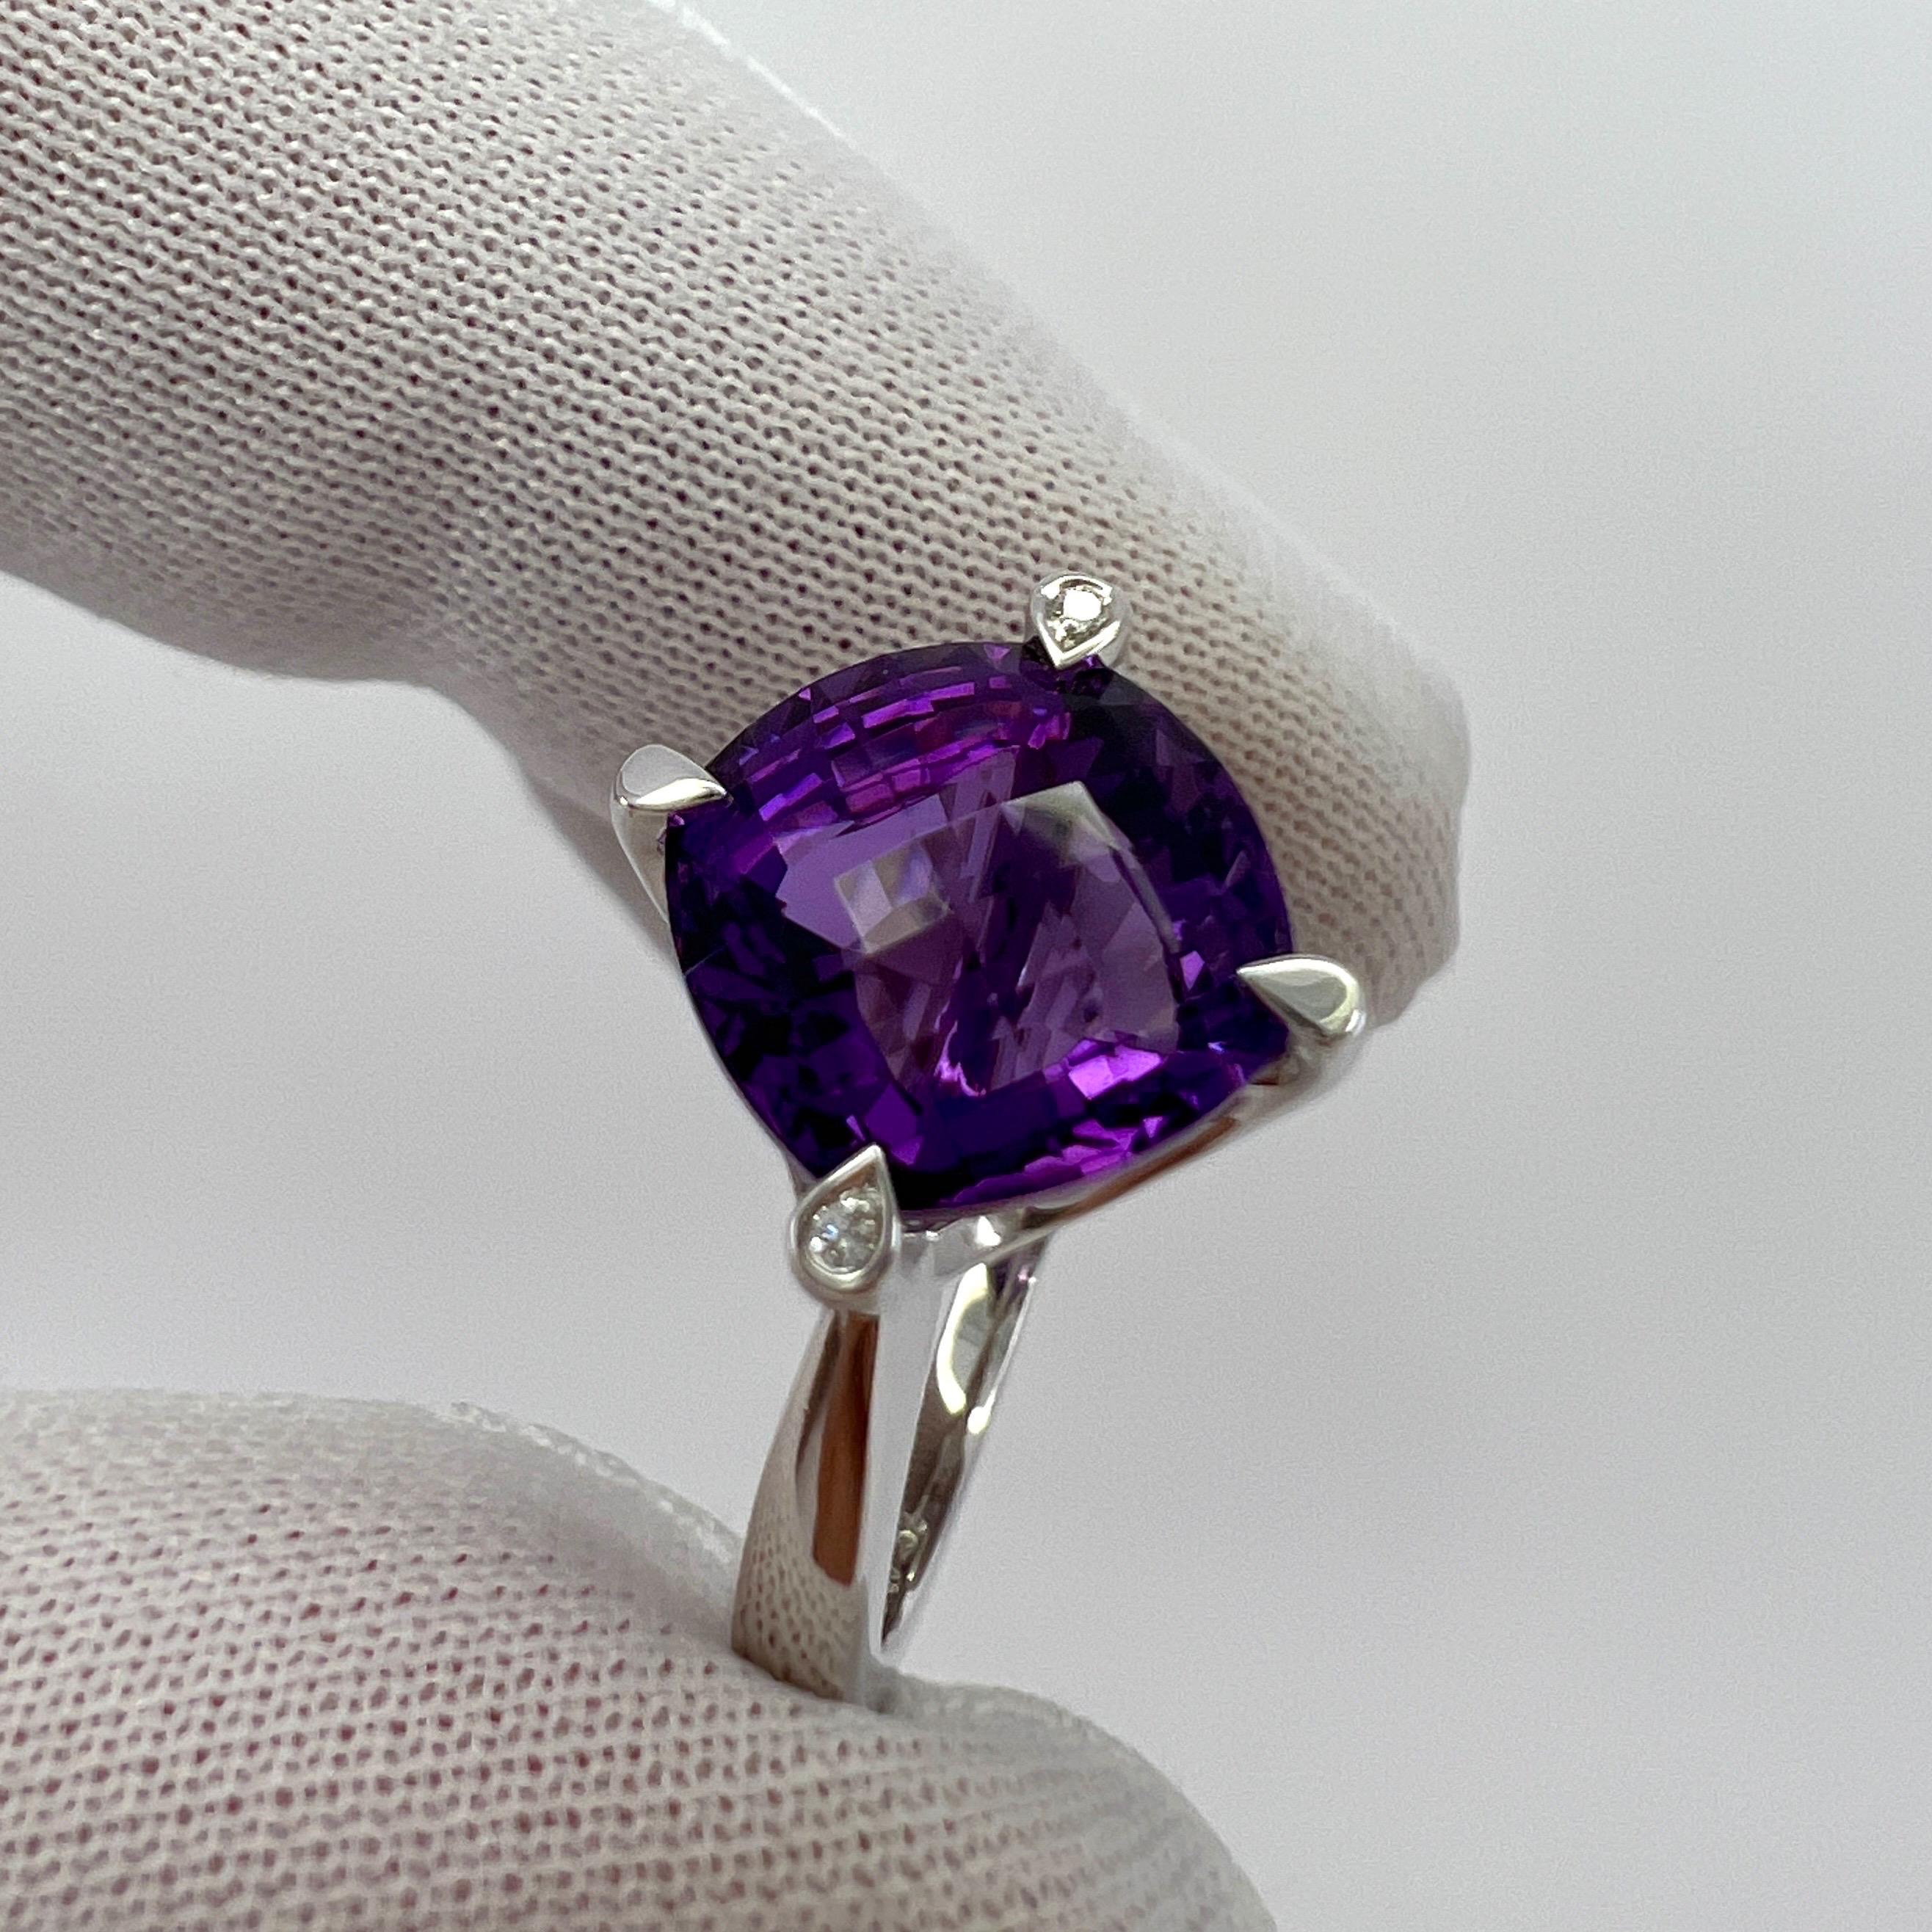 Rare Cartier Inde Mysterieuse Fancy Purple Amethyst Diamond 18k White Gold Ring 5